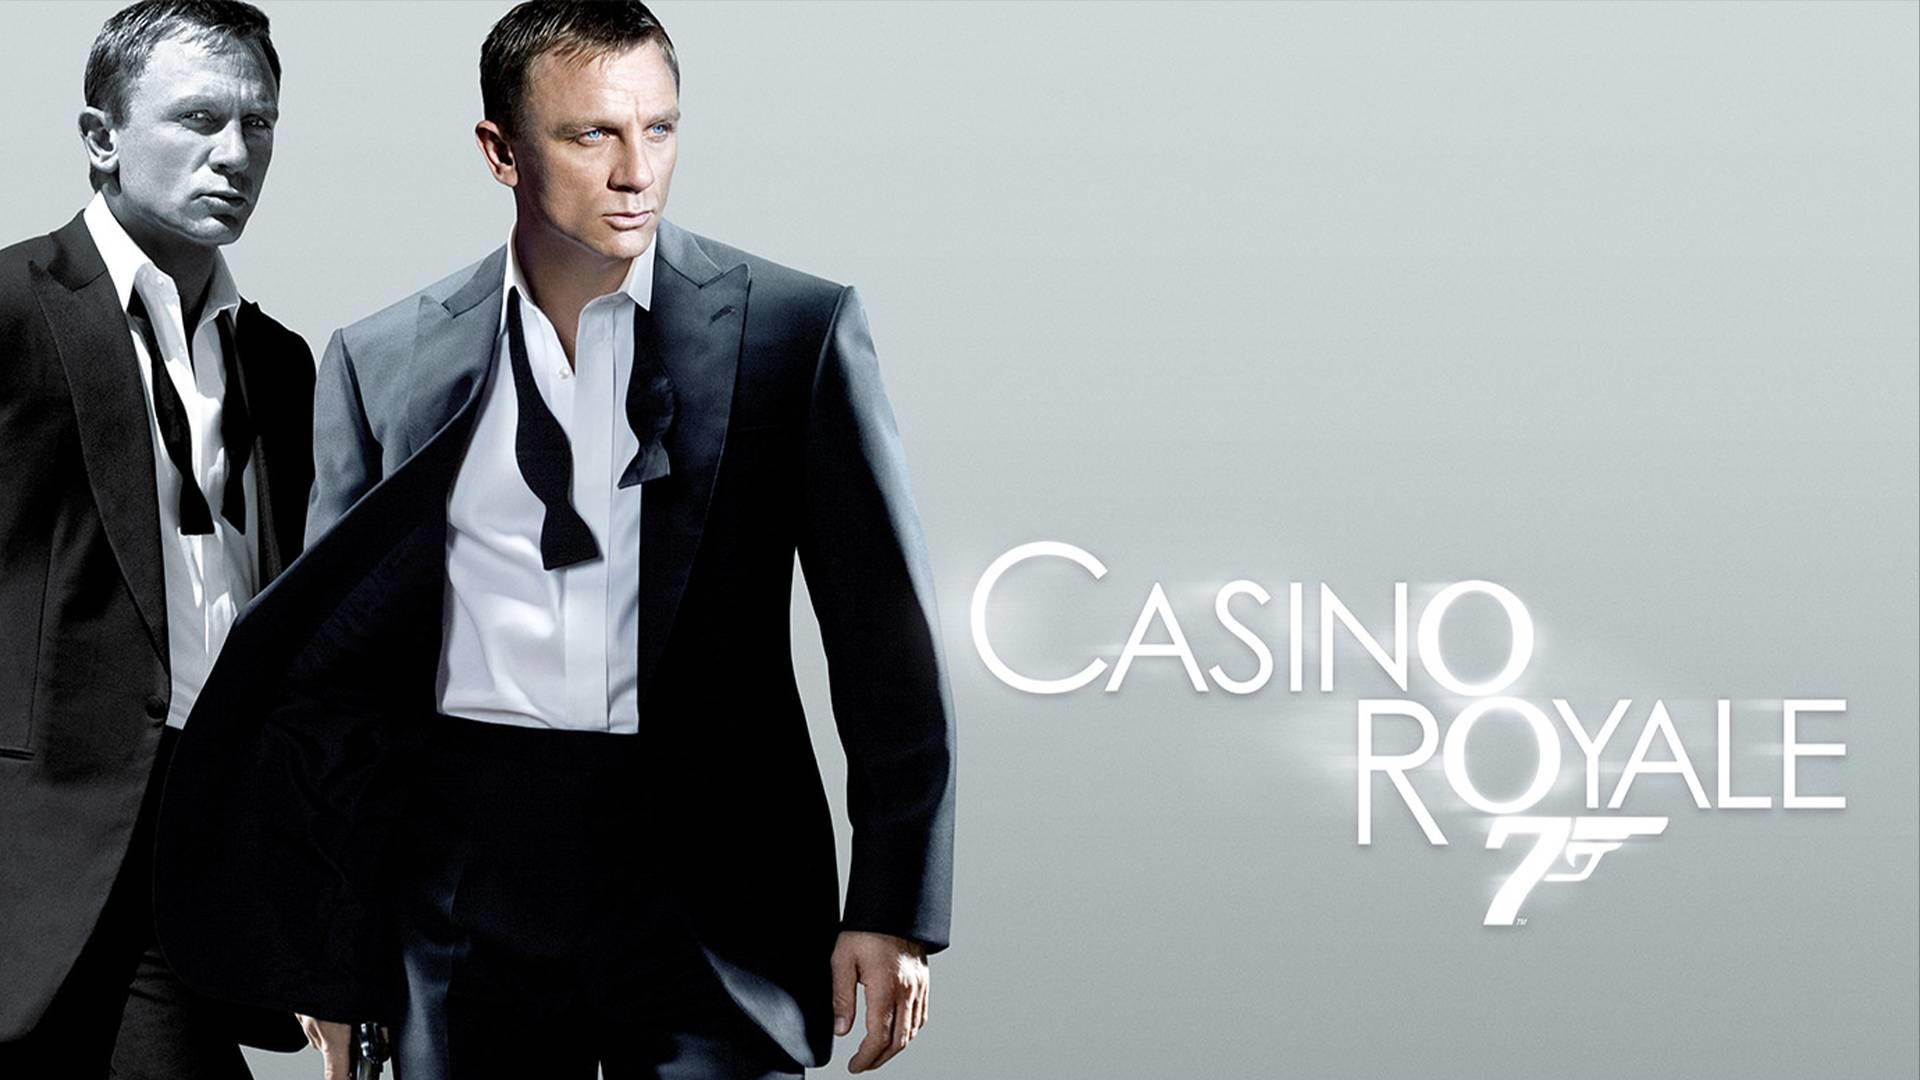 opening chase scene in casino royale